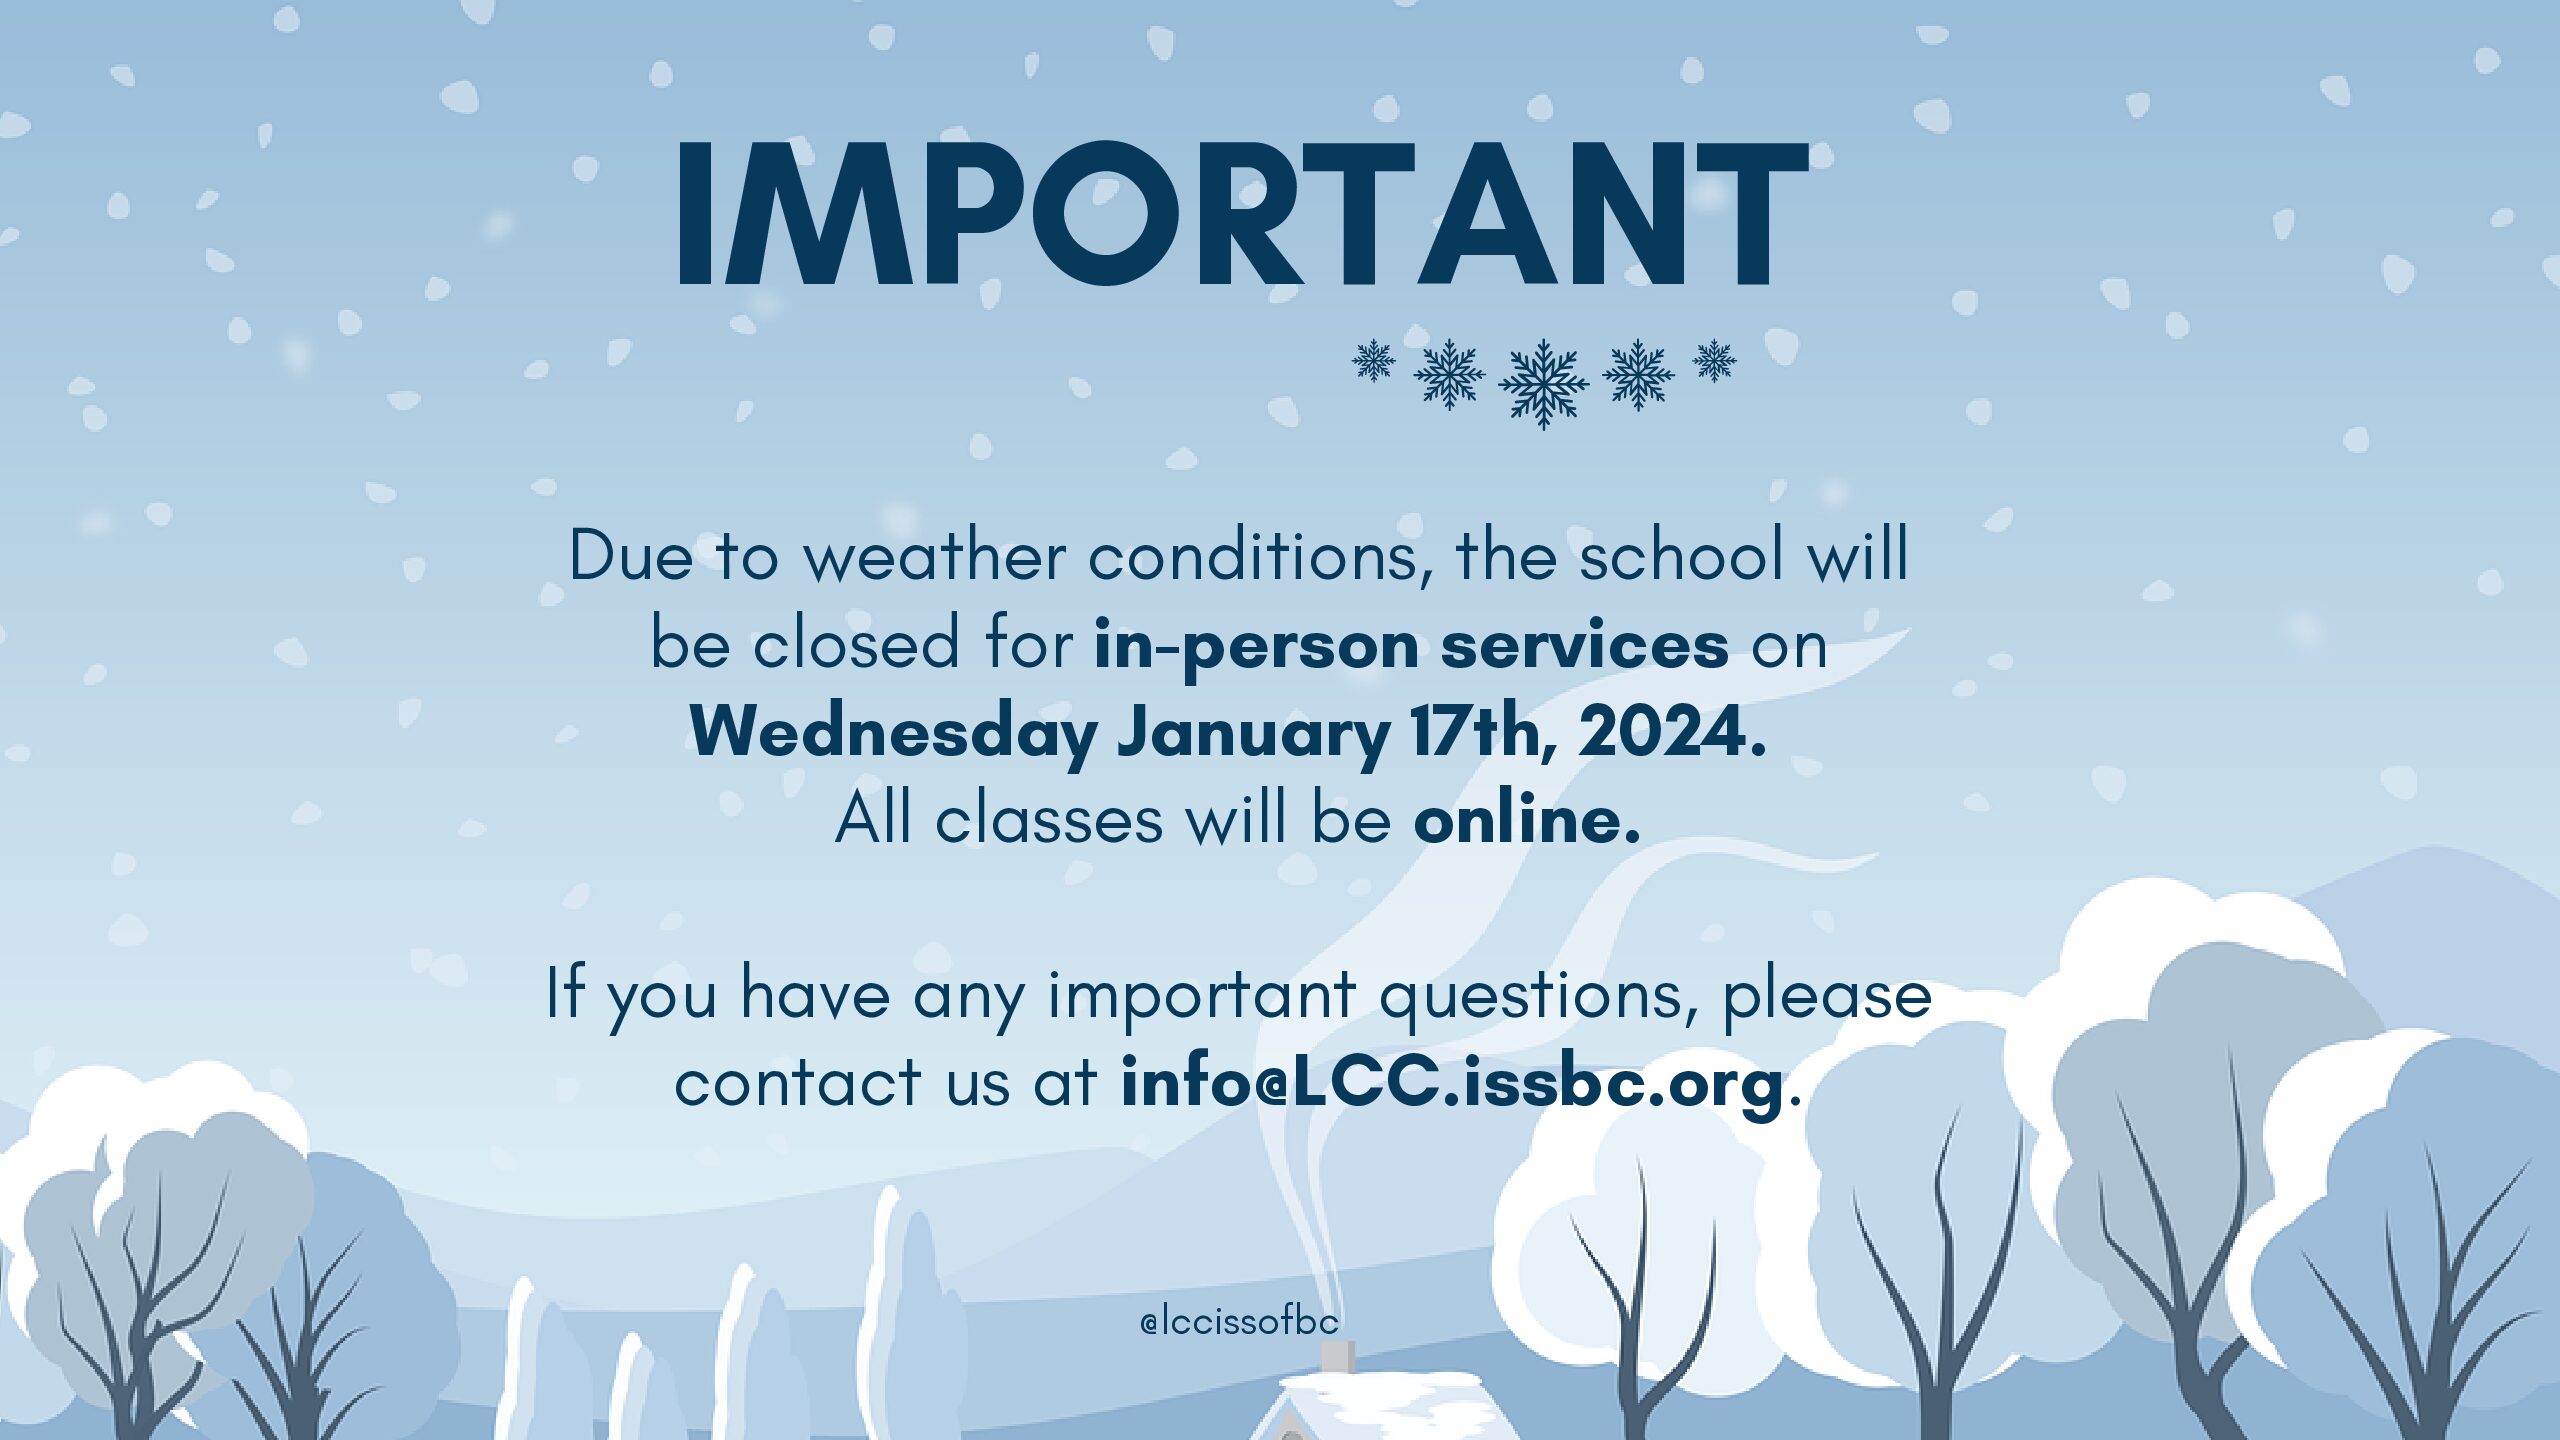 Due to weather conditions, the school will be closed for in-person services on Wednesday January 17th, 2024.  All classes will be online.